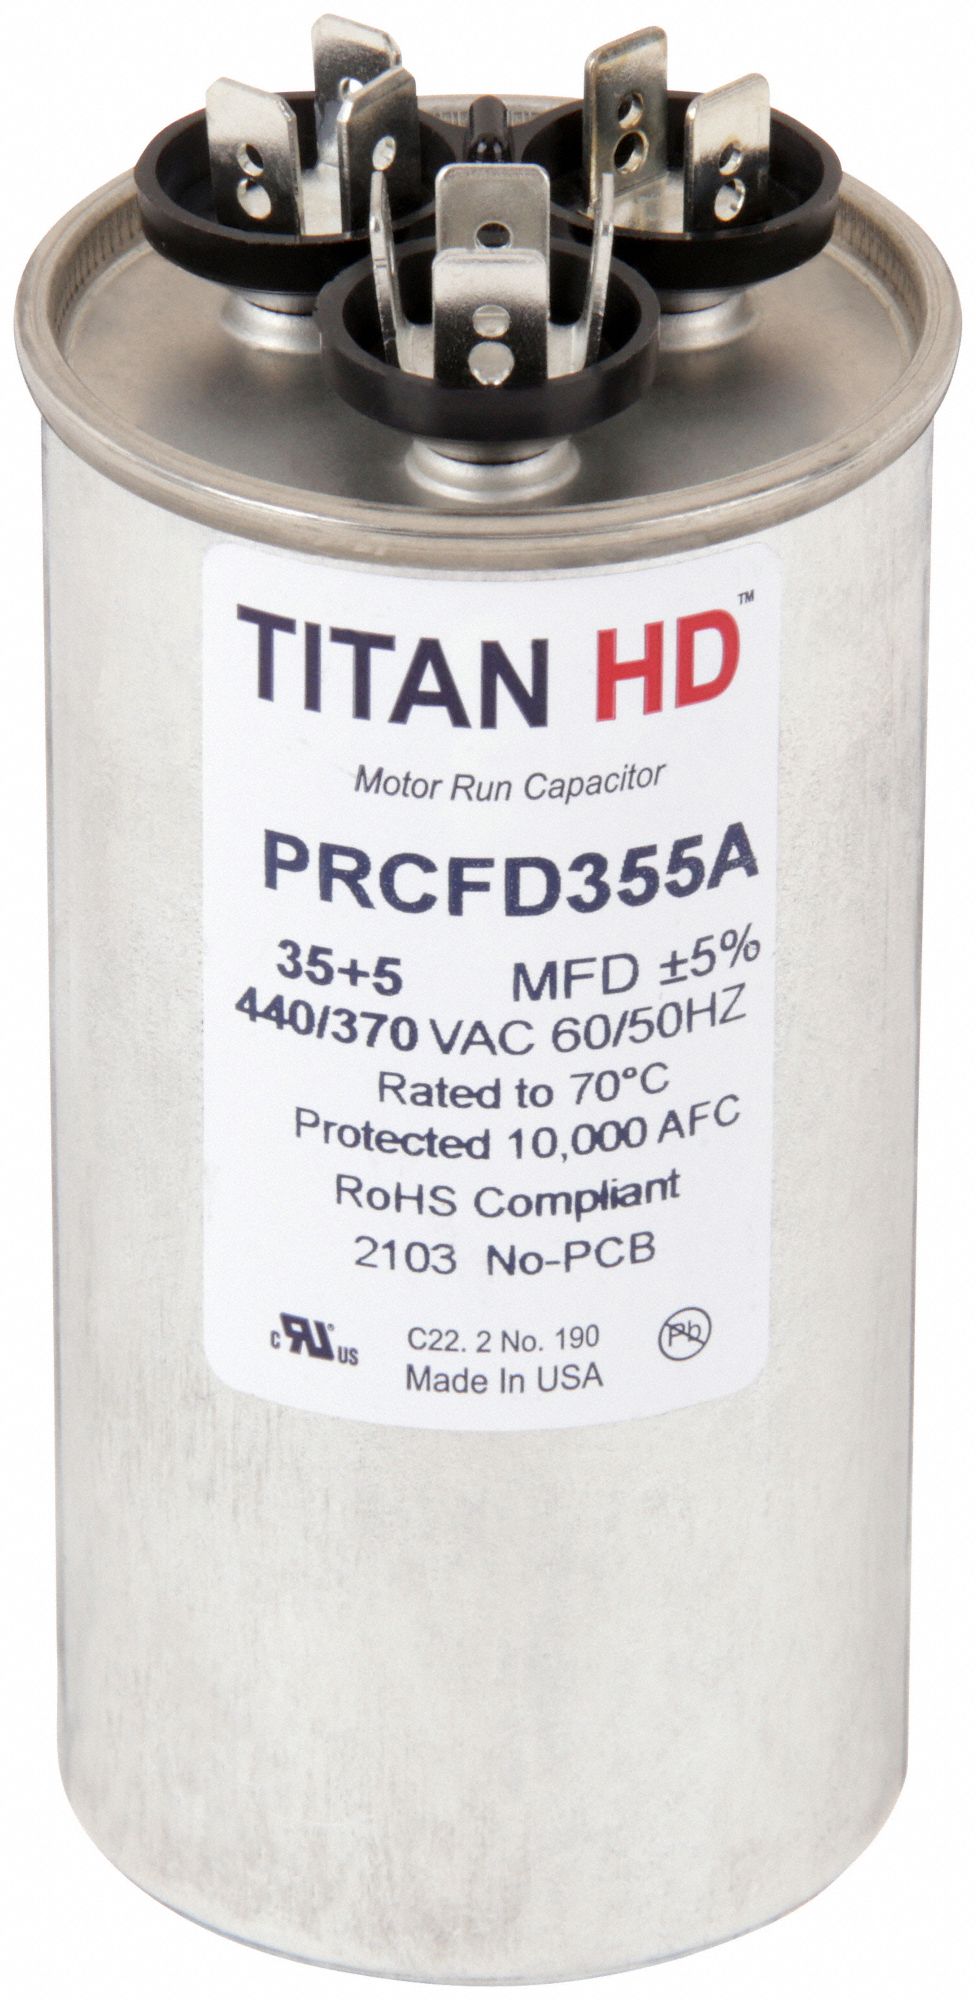 TITAN HD Motor Dual Run Capacitor: Round, 440/370V AC, 35/5 mfd, 4 11/32 in  Overall Ht